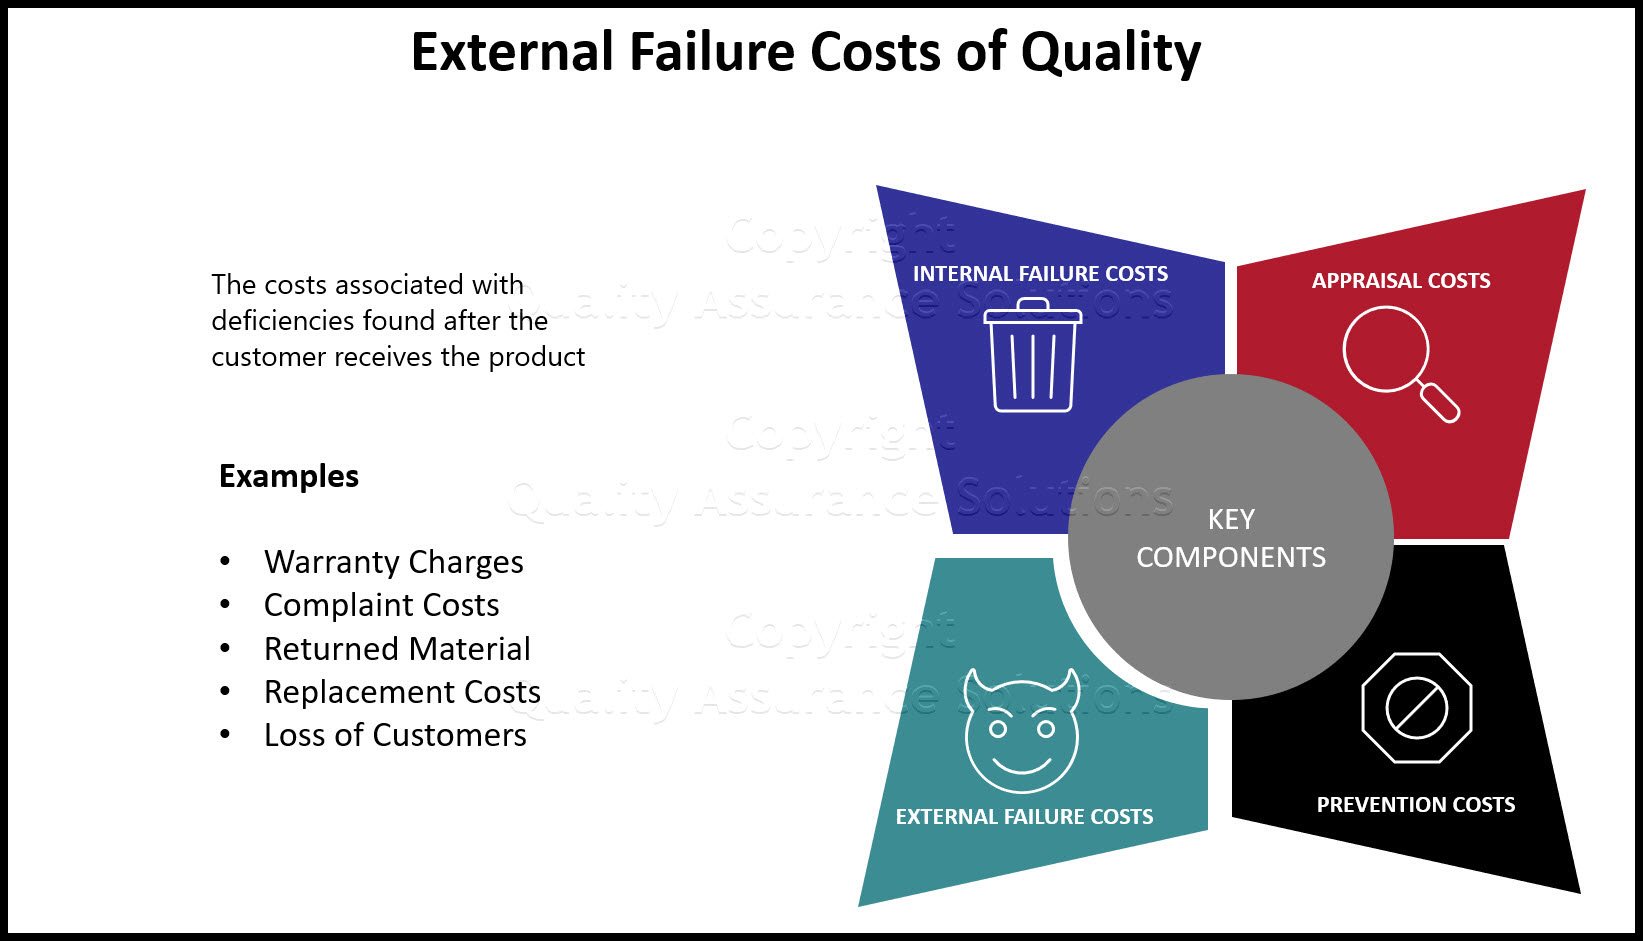 External Failure Costs associated with deficiencies that are found after the shipment of the product.